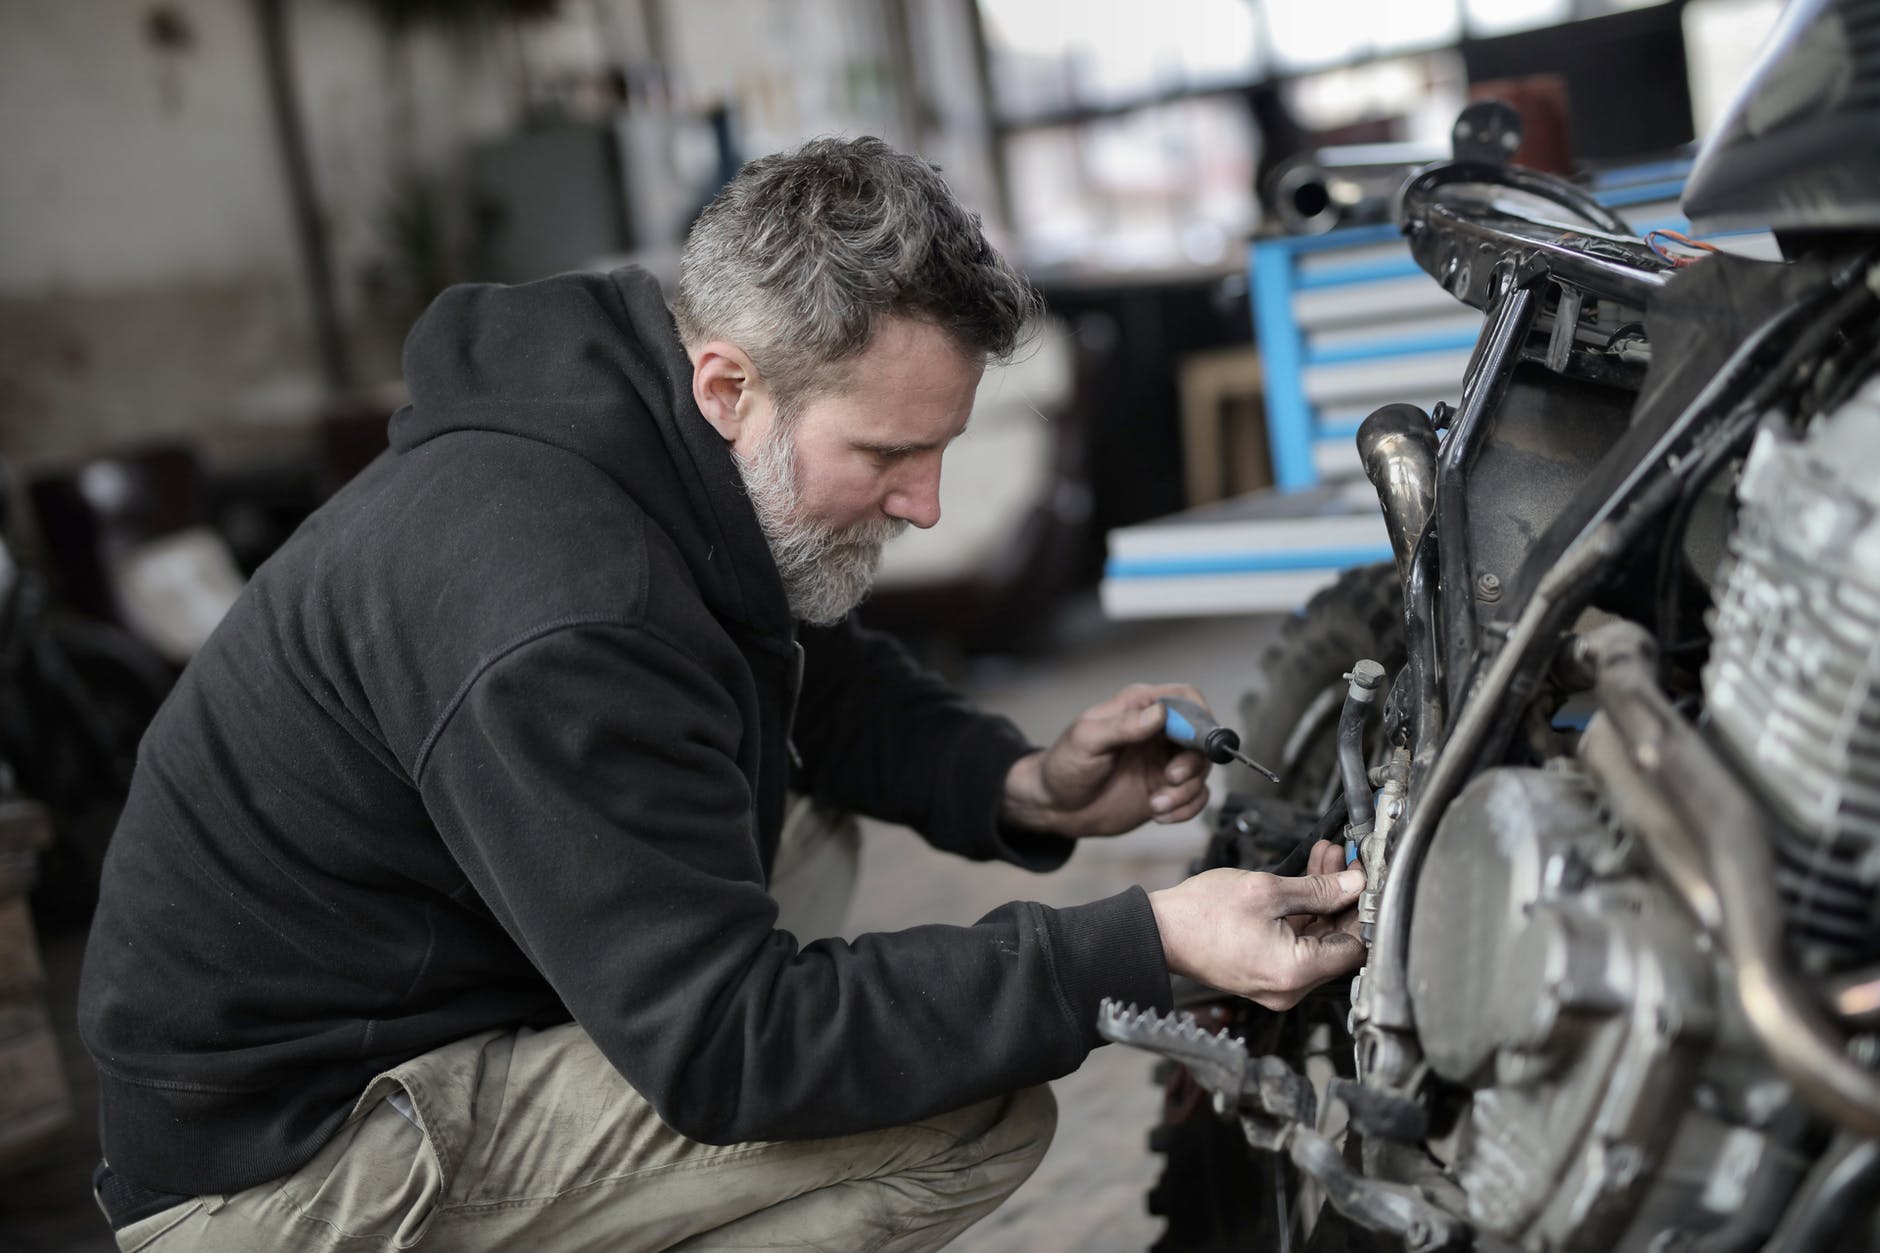 He kept his promise and worked as a mechanic. | Source: Pexels